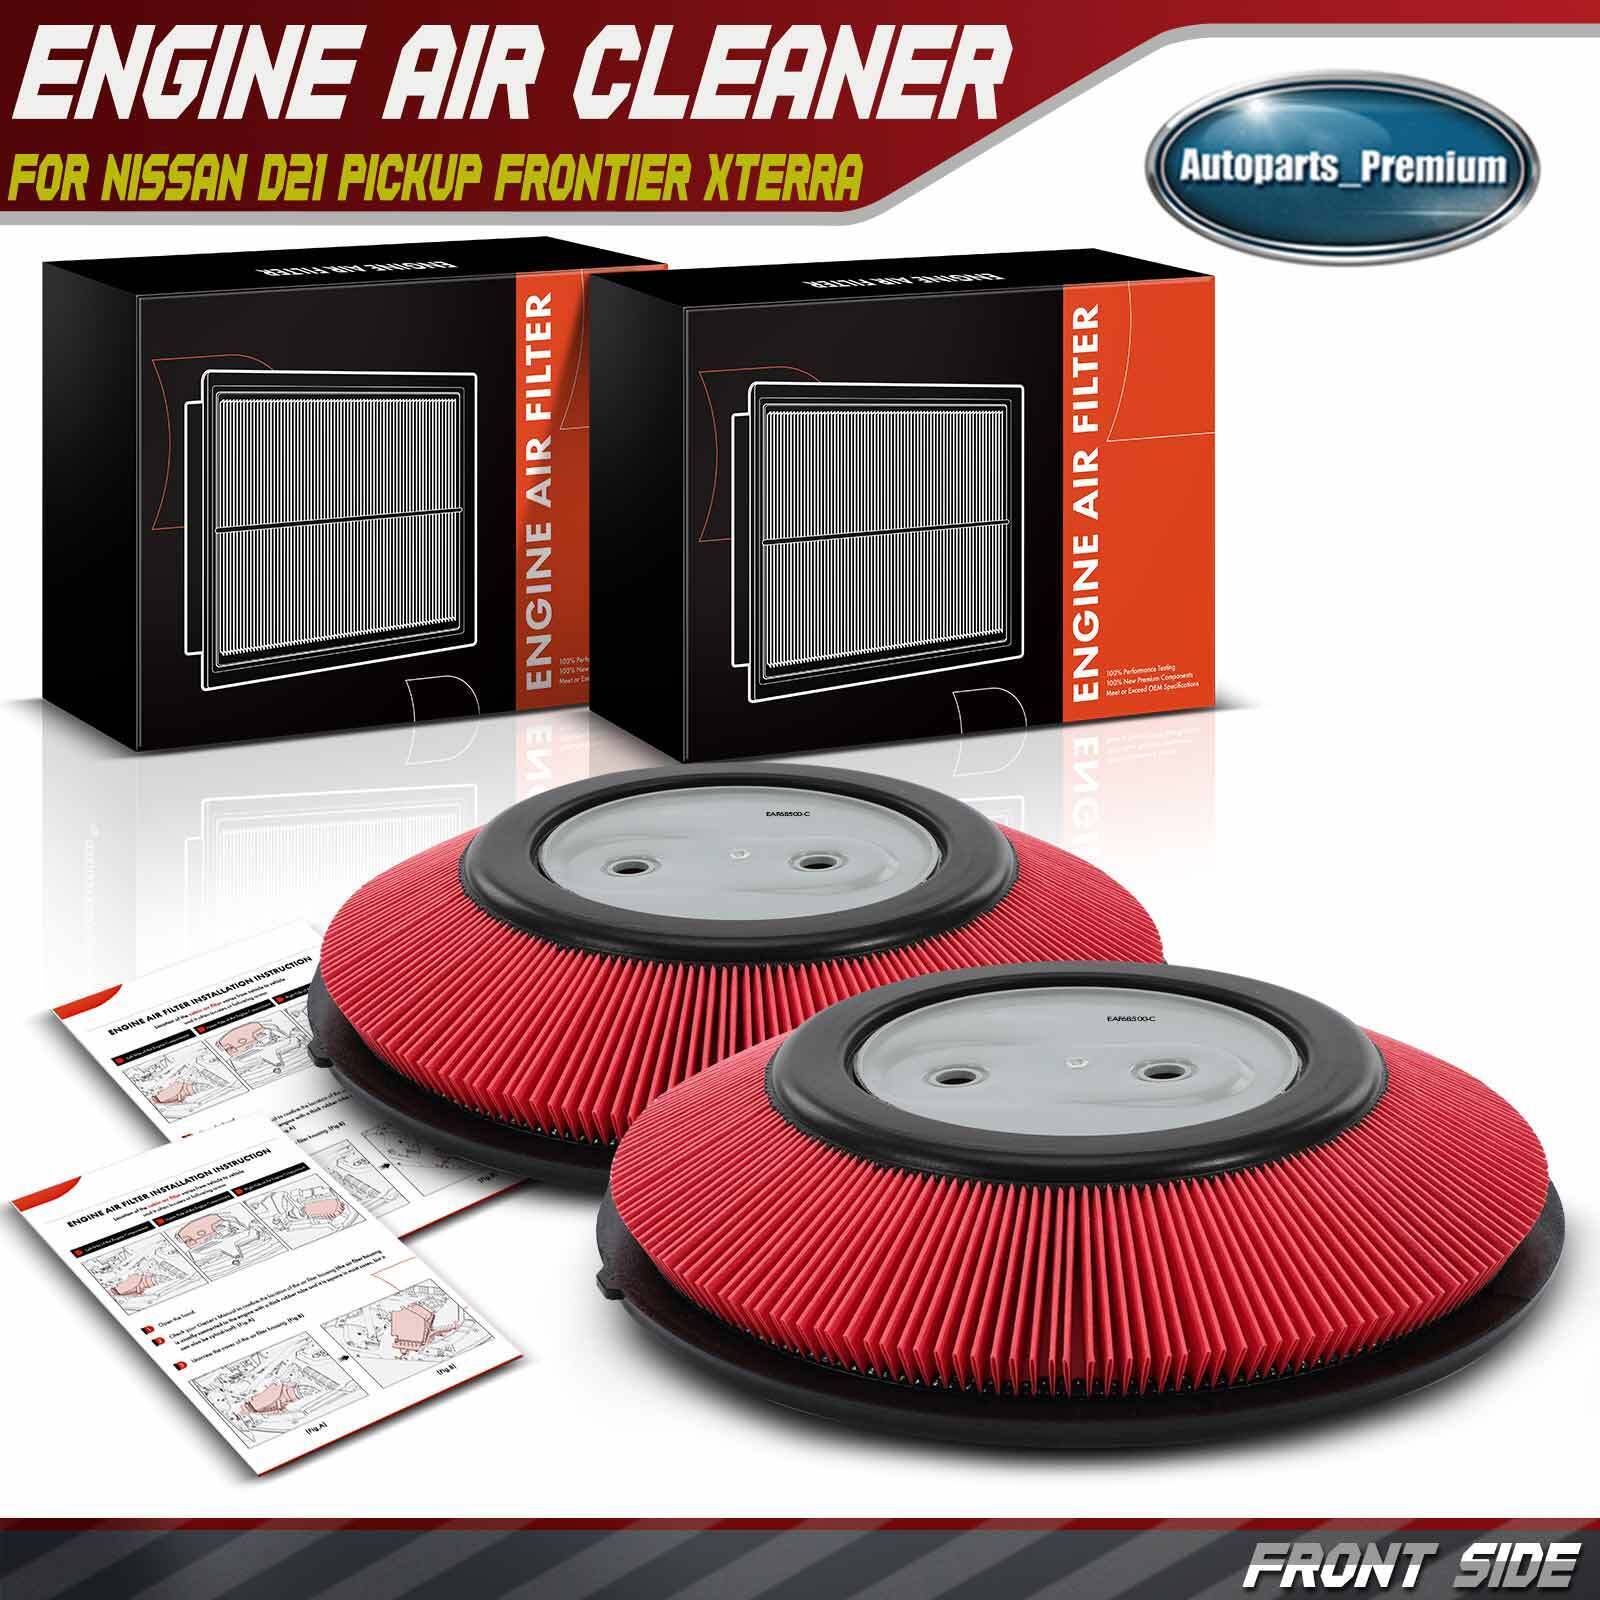 2pcs Engine Air Filter for Nissan D21 Pickup 90-94 Frontier 98-04 Pickup Xterra